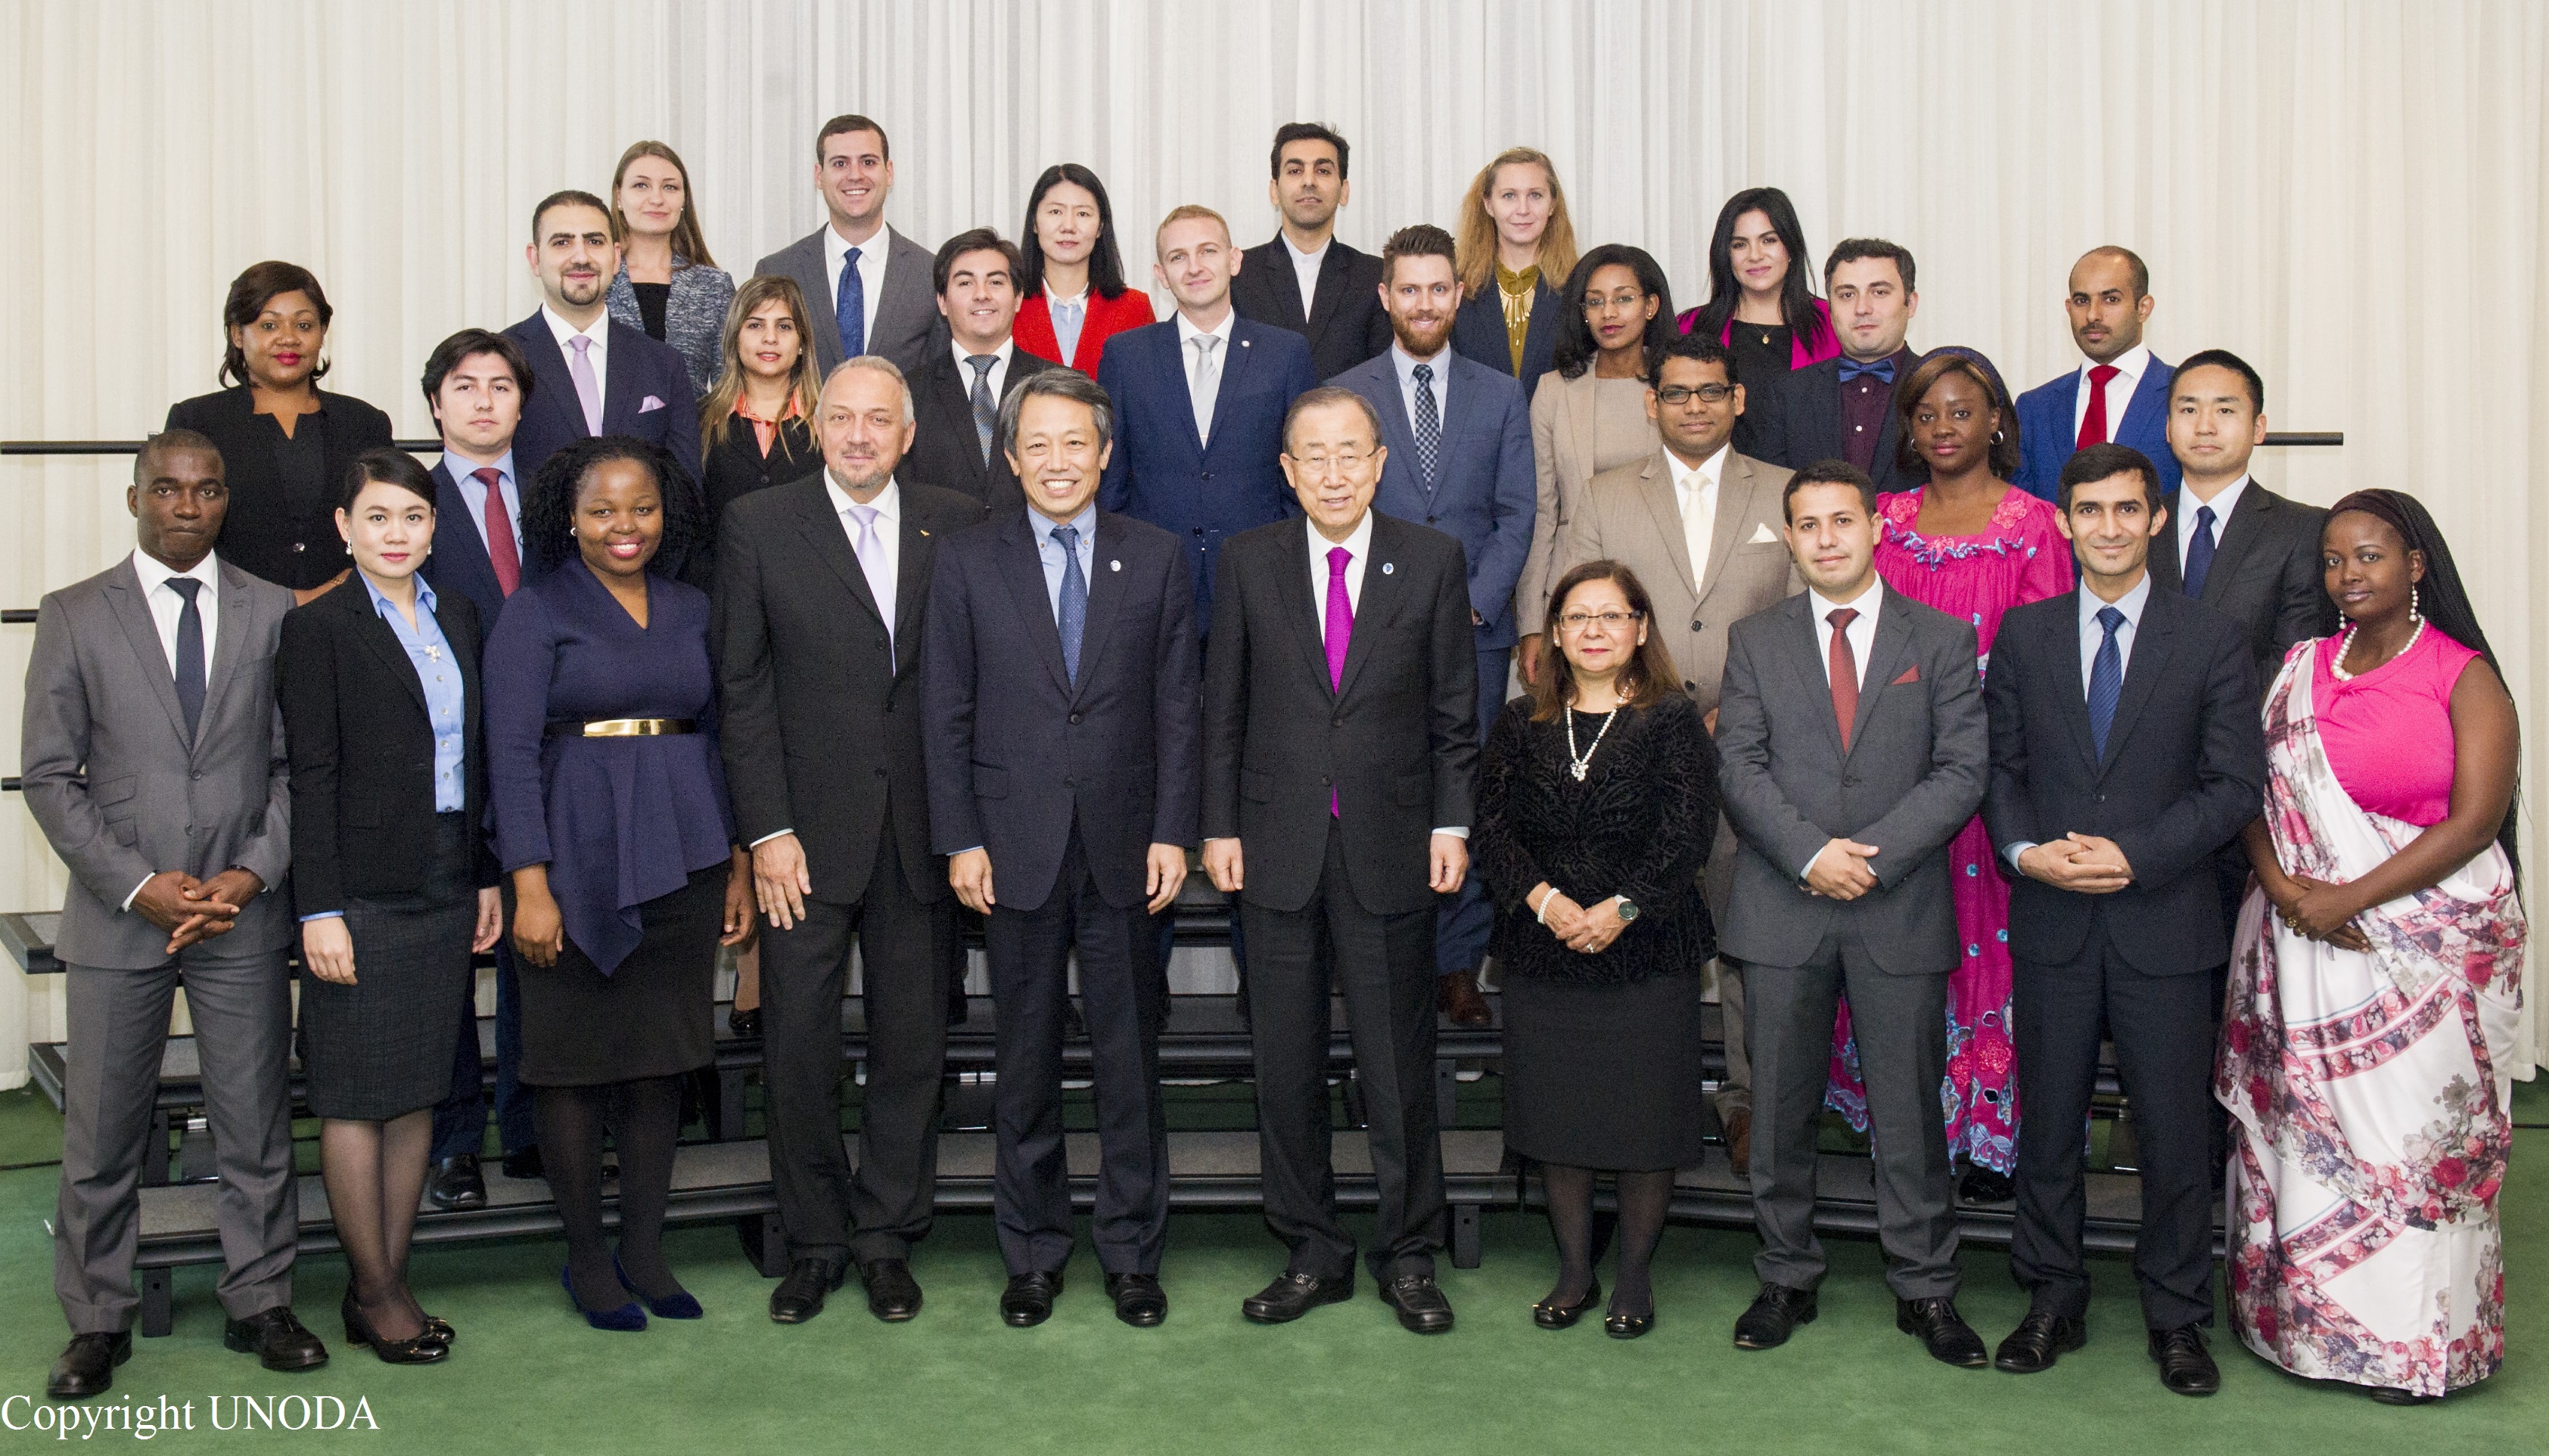 Secretary-General Ban Ki-moon Photo Opportunity with Fellows of the 2016 United Nations Disarmament Programme